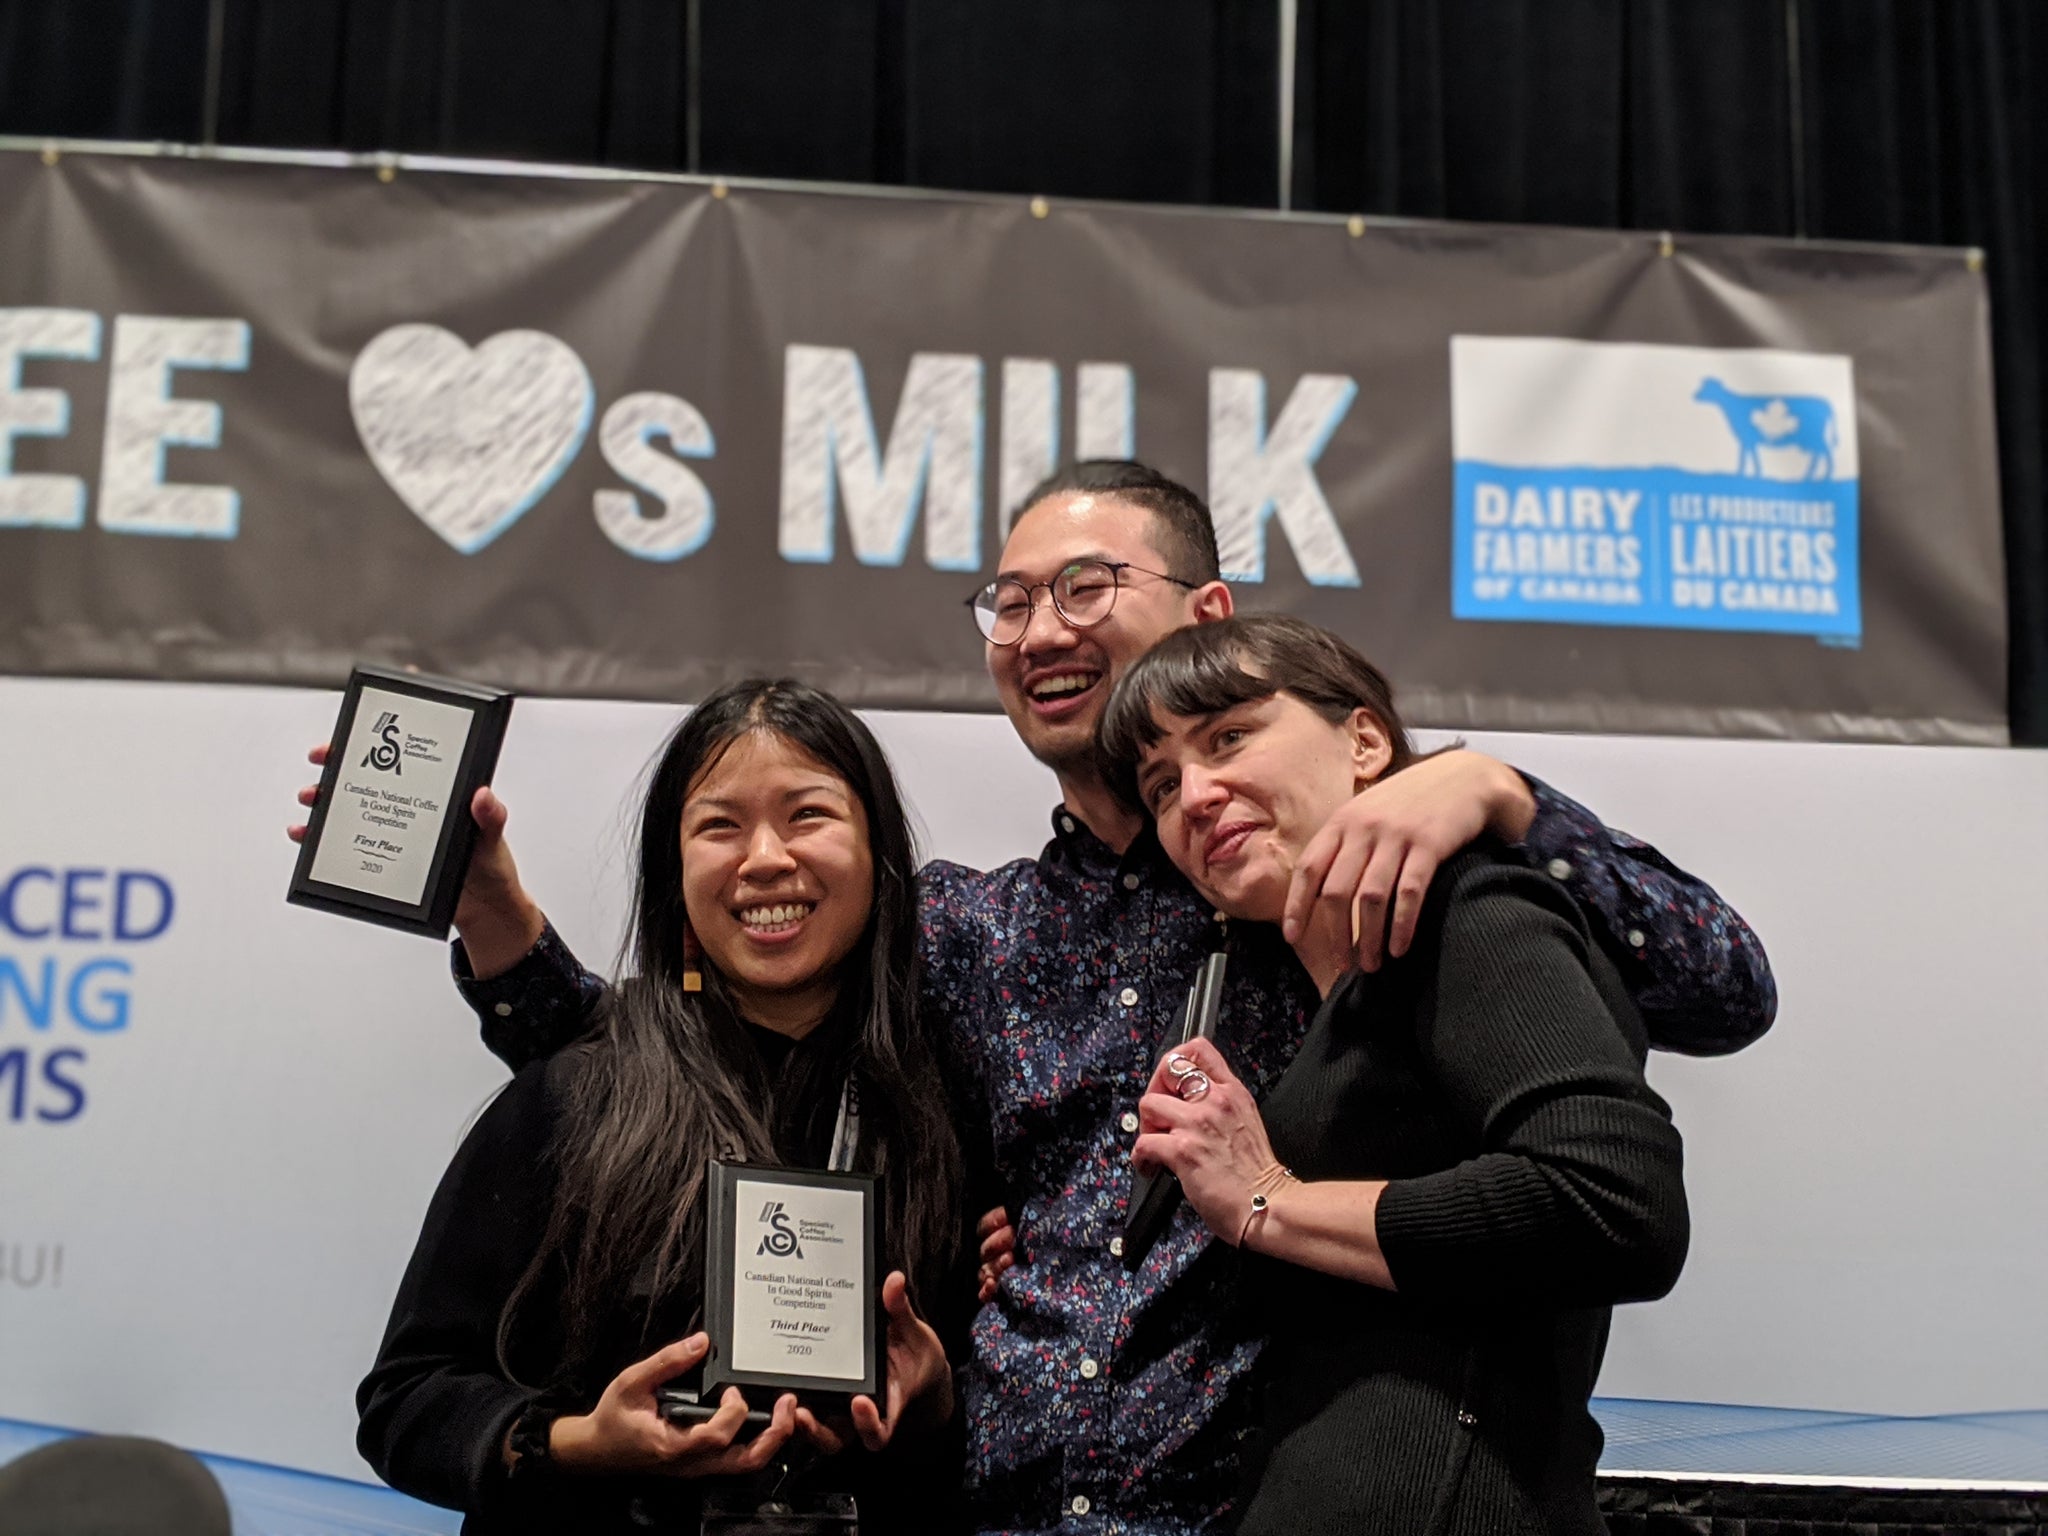 Nelson Phu, together with Stacey Lynden and Michelle Ocfemia, at the 2020 Canadian Coffee in Good Spirits Championship